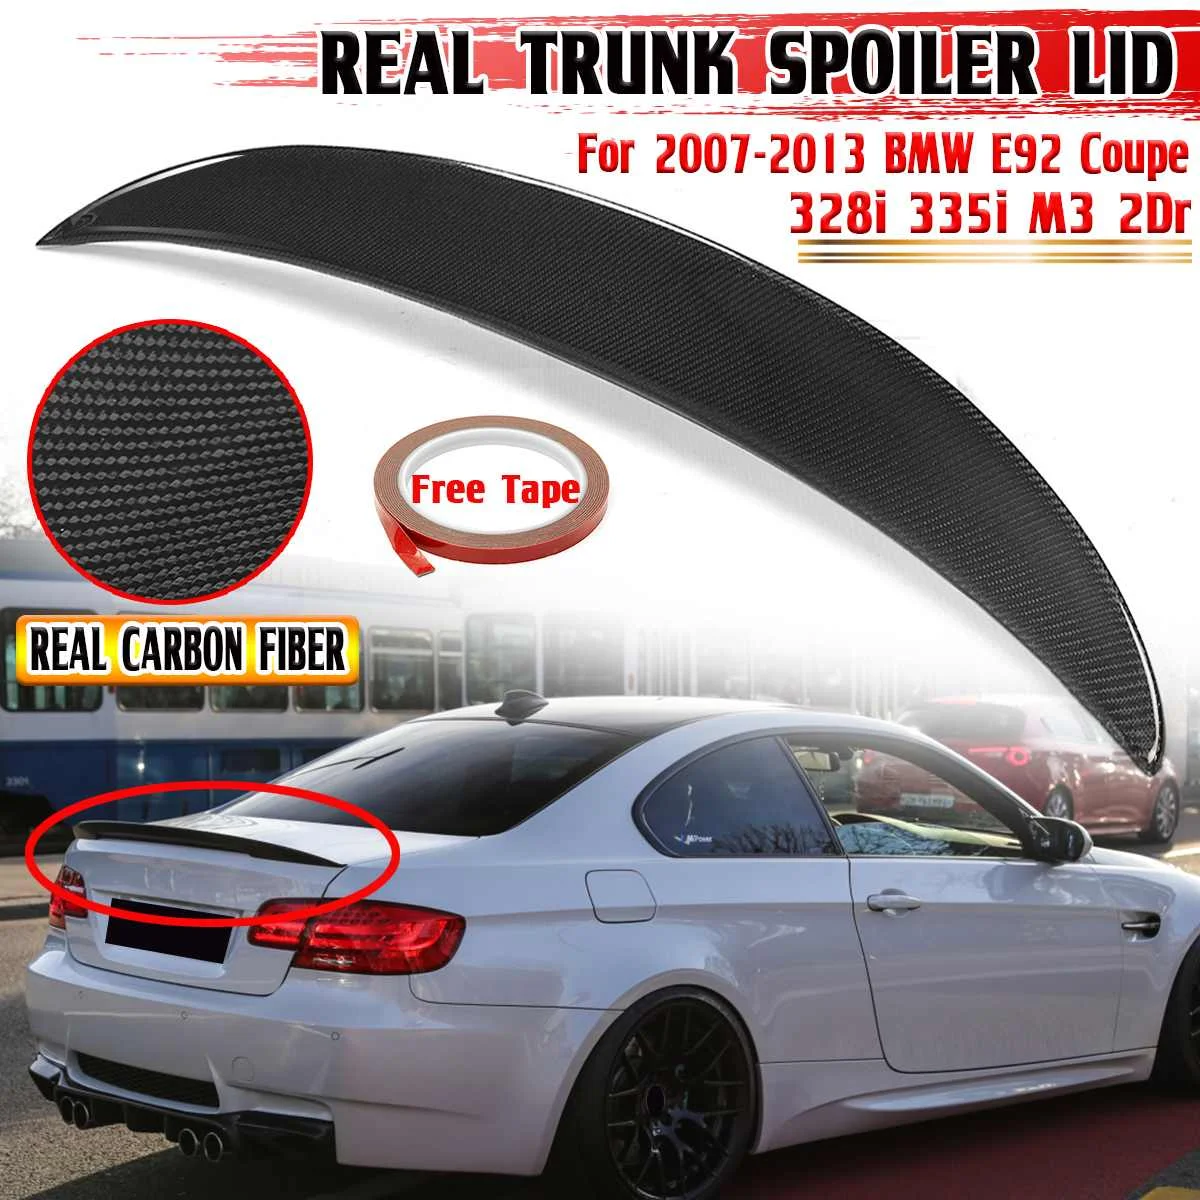 High quality Carbon Fiber High Kick Trunk Spoiler Wings For BMW E92 for Coupe 328i 335i M3 Wing Lip CF